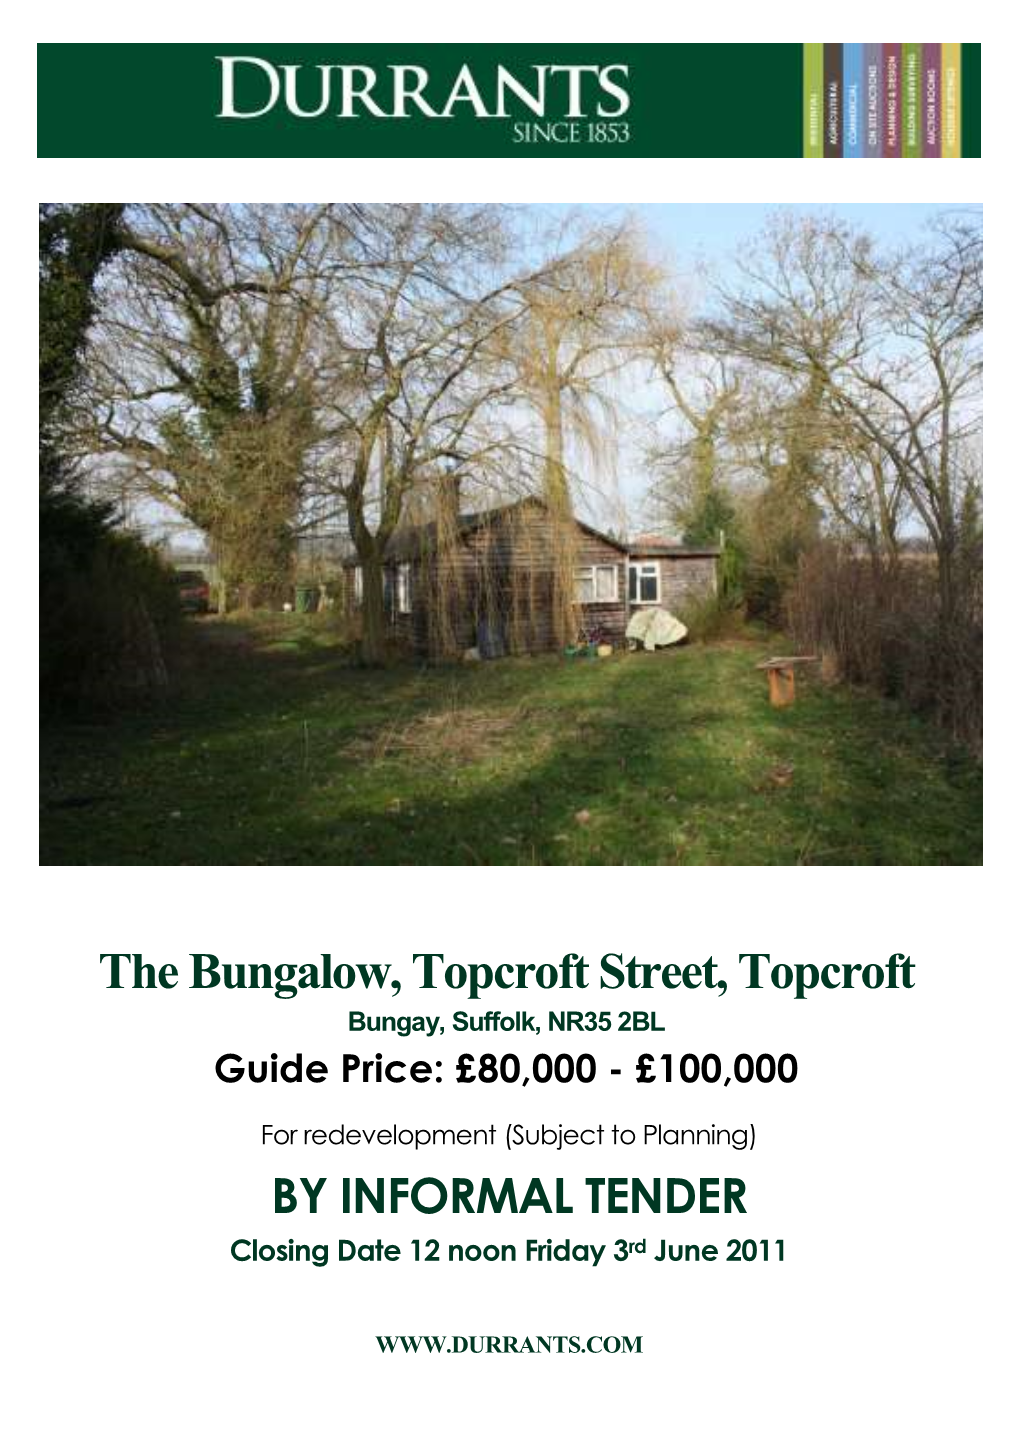 The Bungalow, Topcroft Street, Topcroft Bungay, Suffolk, NR35 2BL Guide Price: £80,000 - £100,000